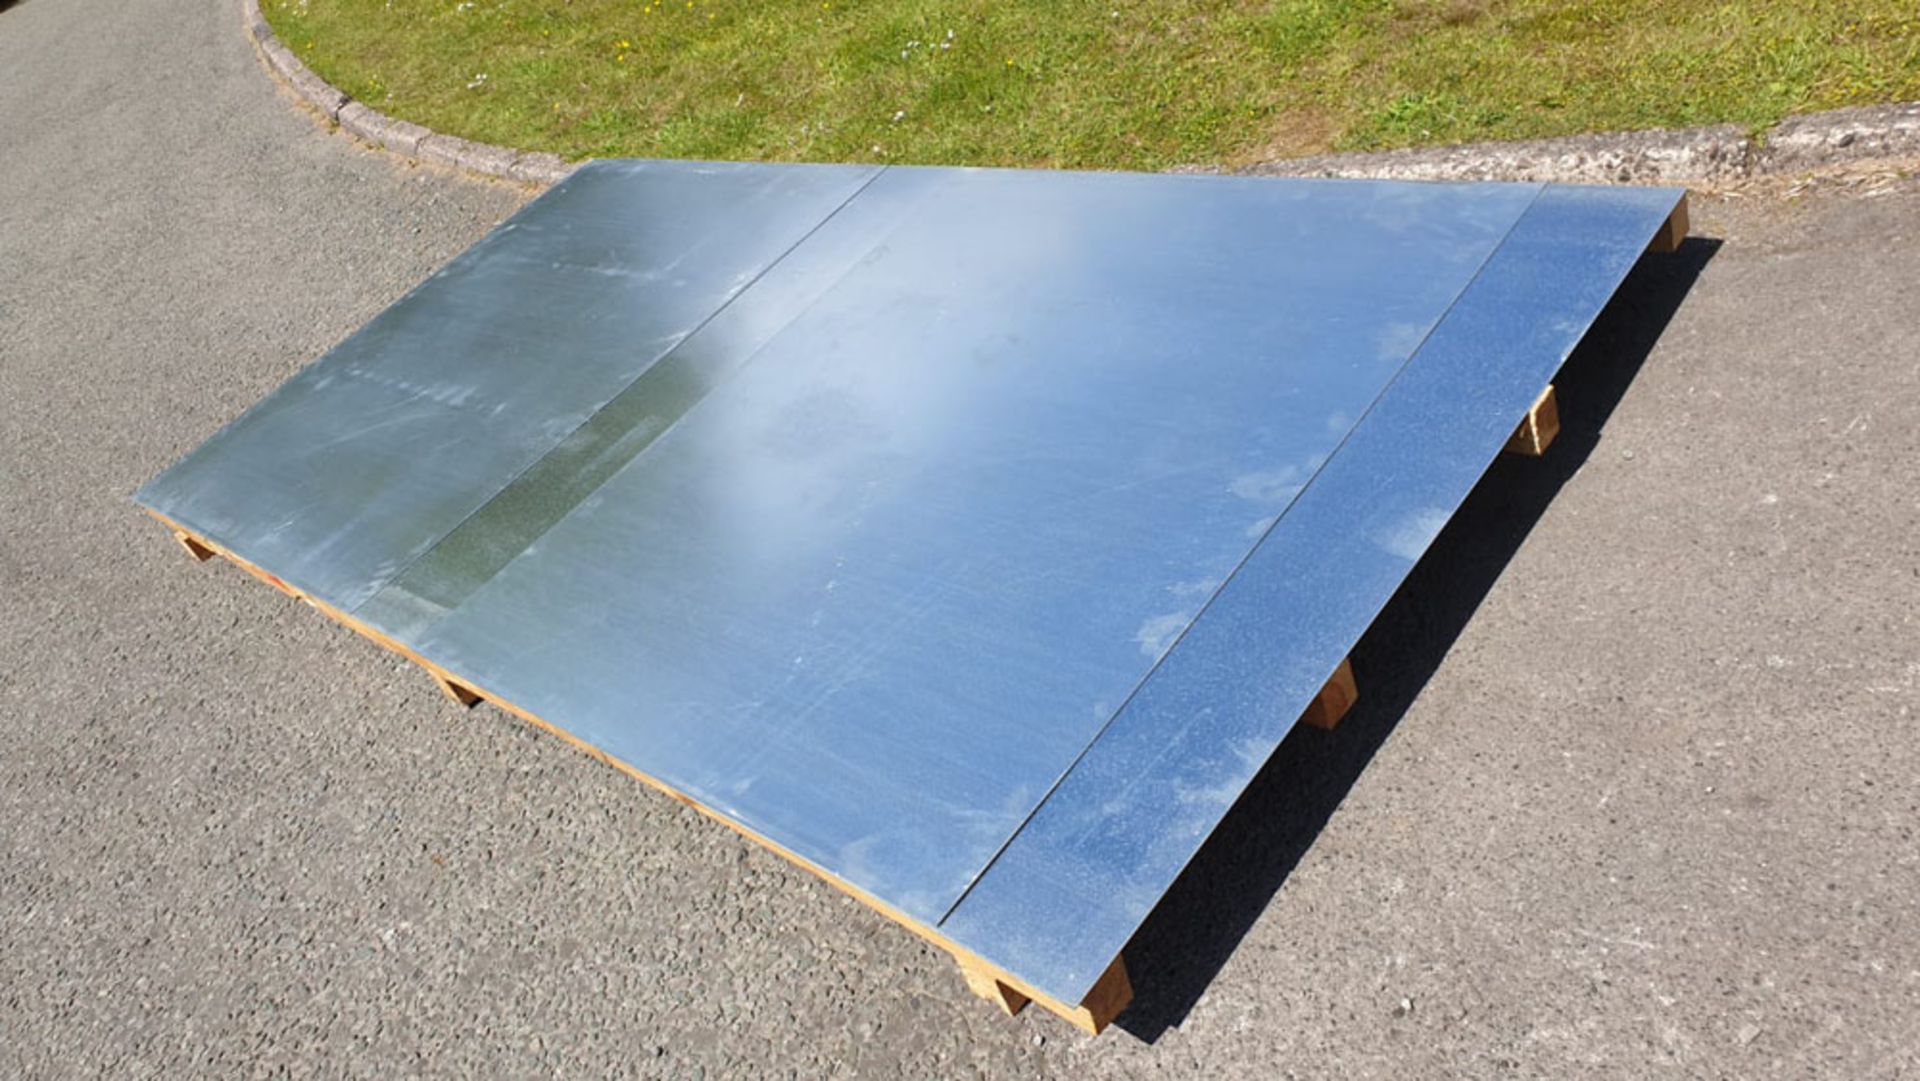 Lot of 3 x Galvanised Steel Sheets. Various Sizes as per lot Description. - Image 2 of 3